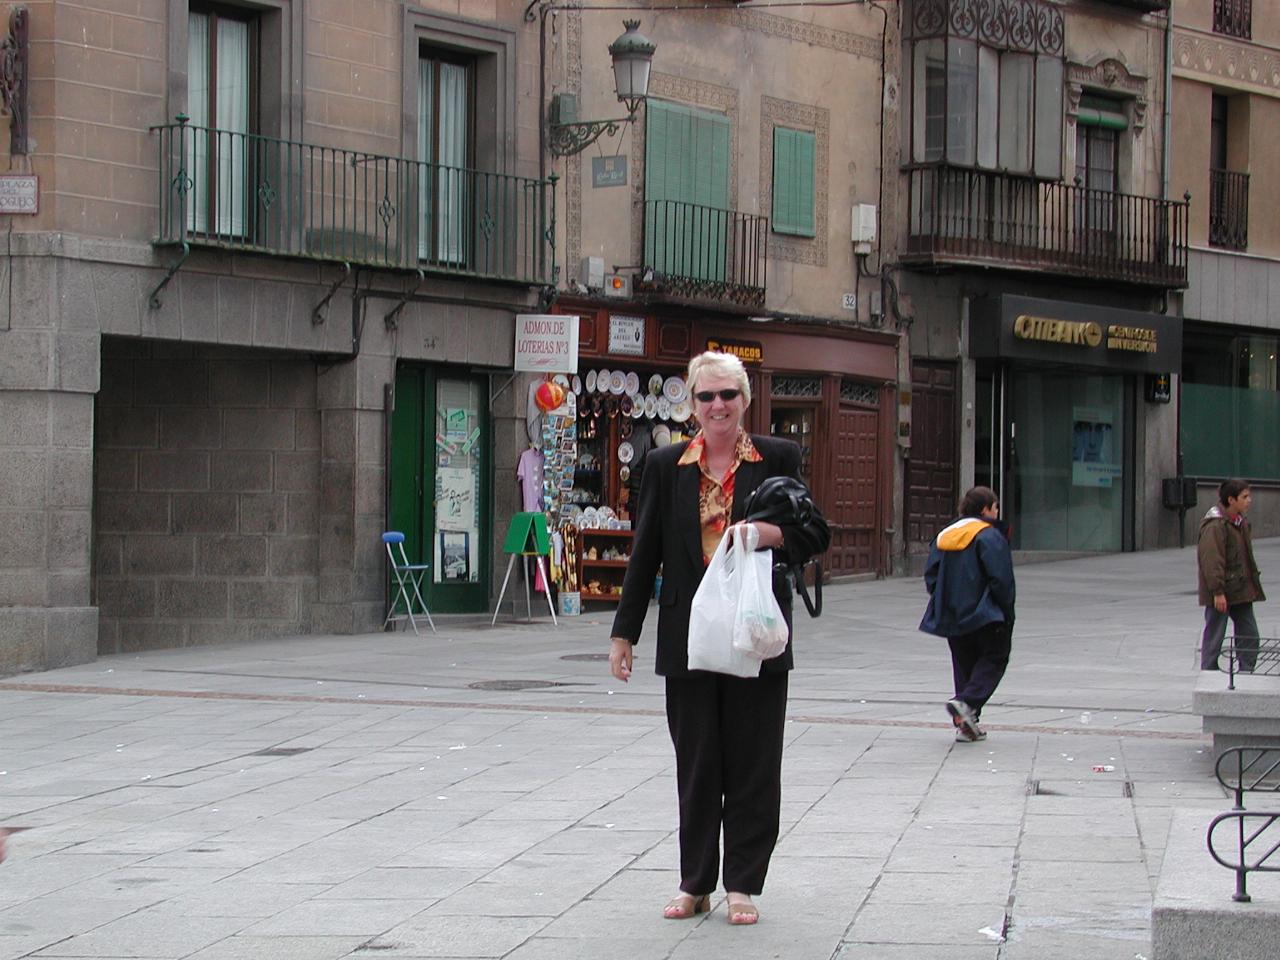 A happy Yvonne with success in Spanish shopping